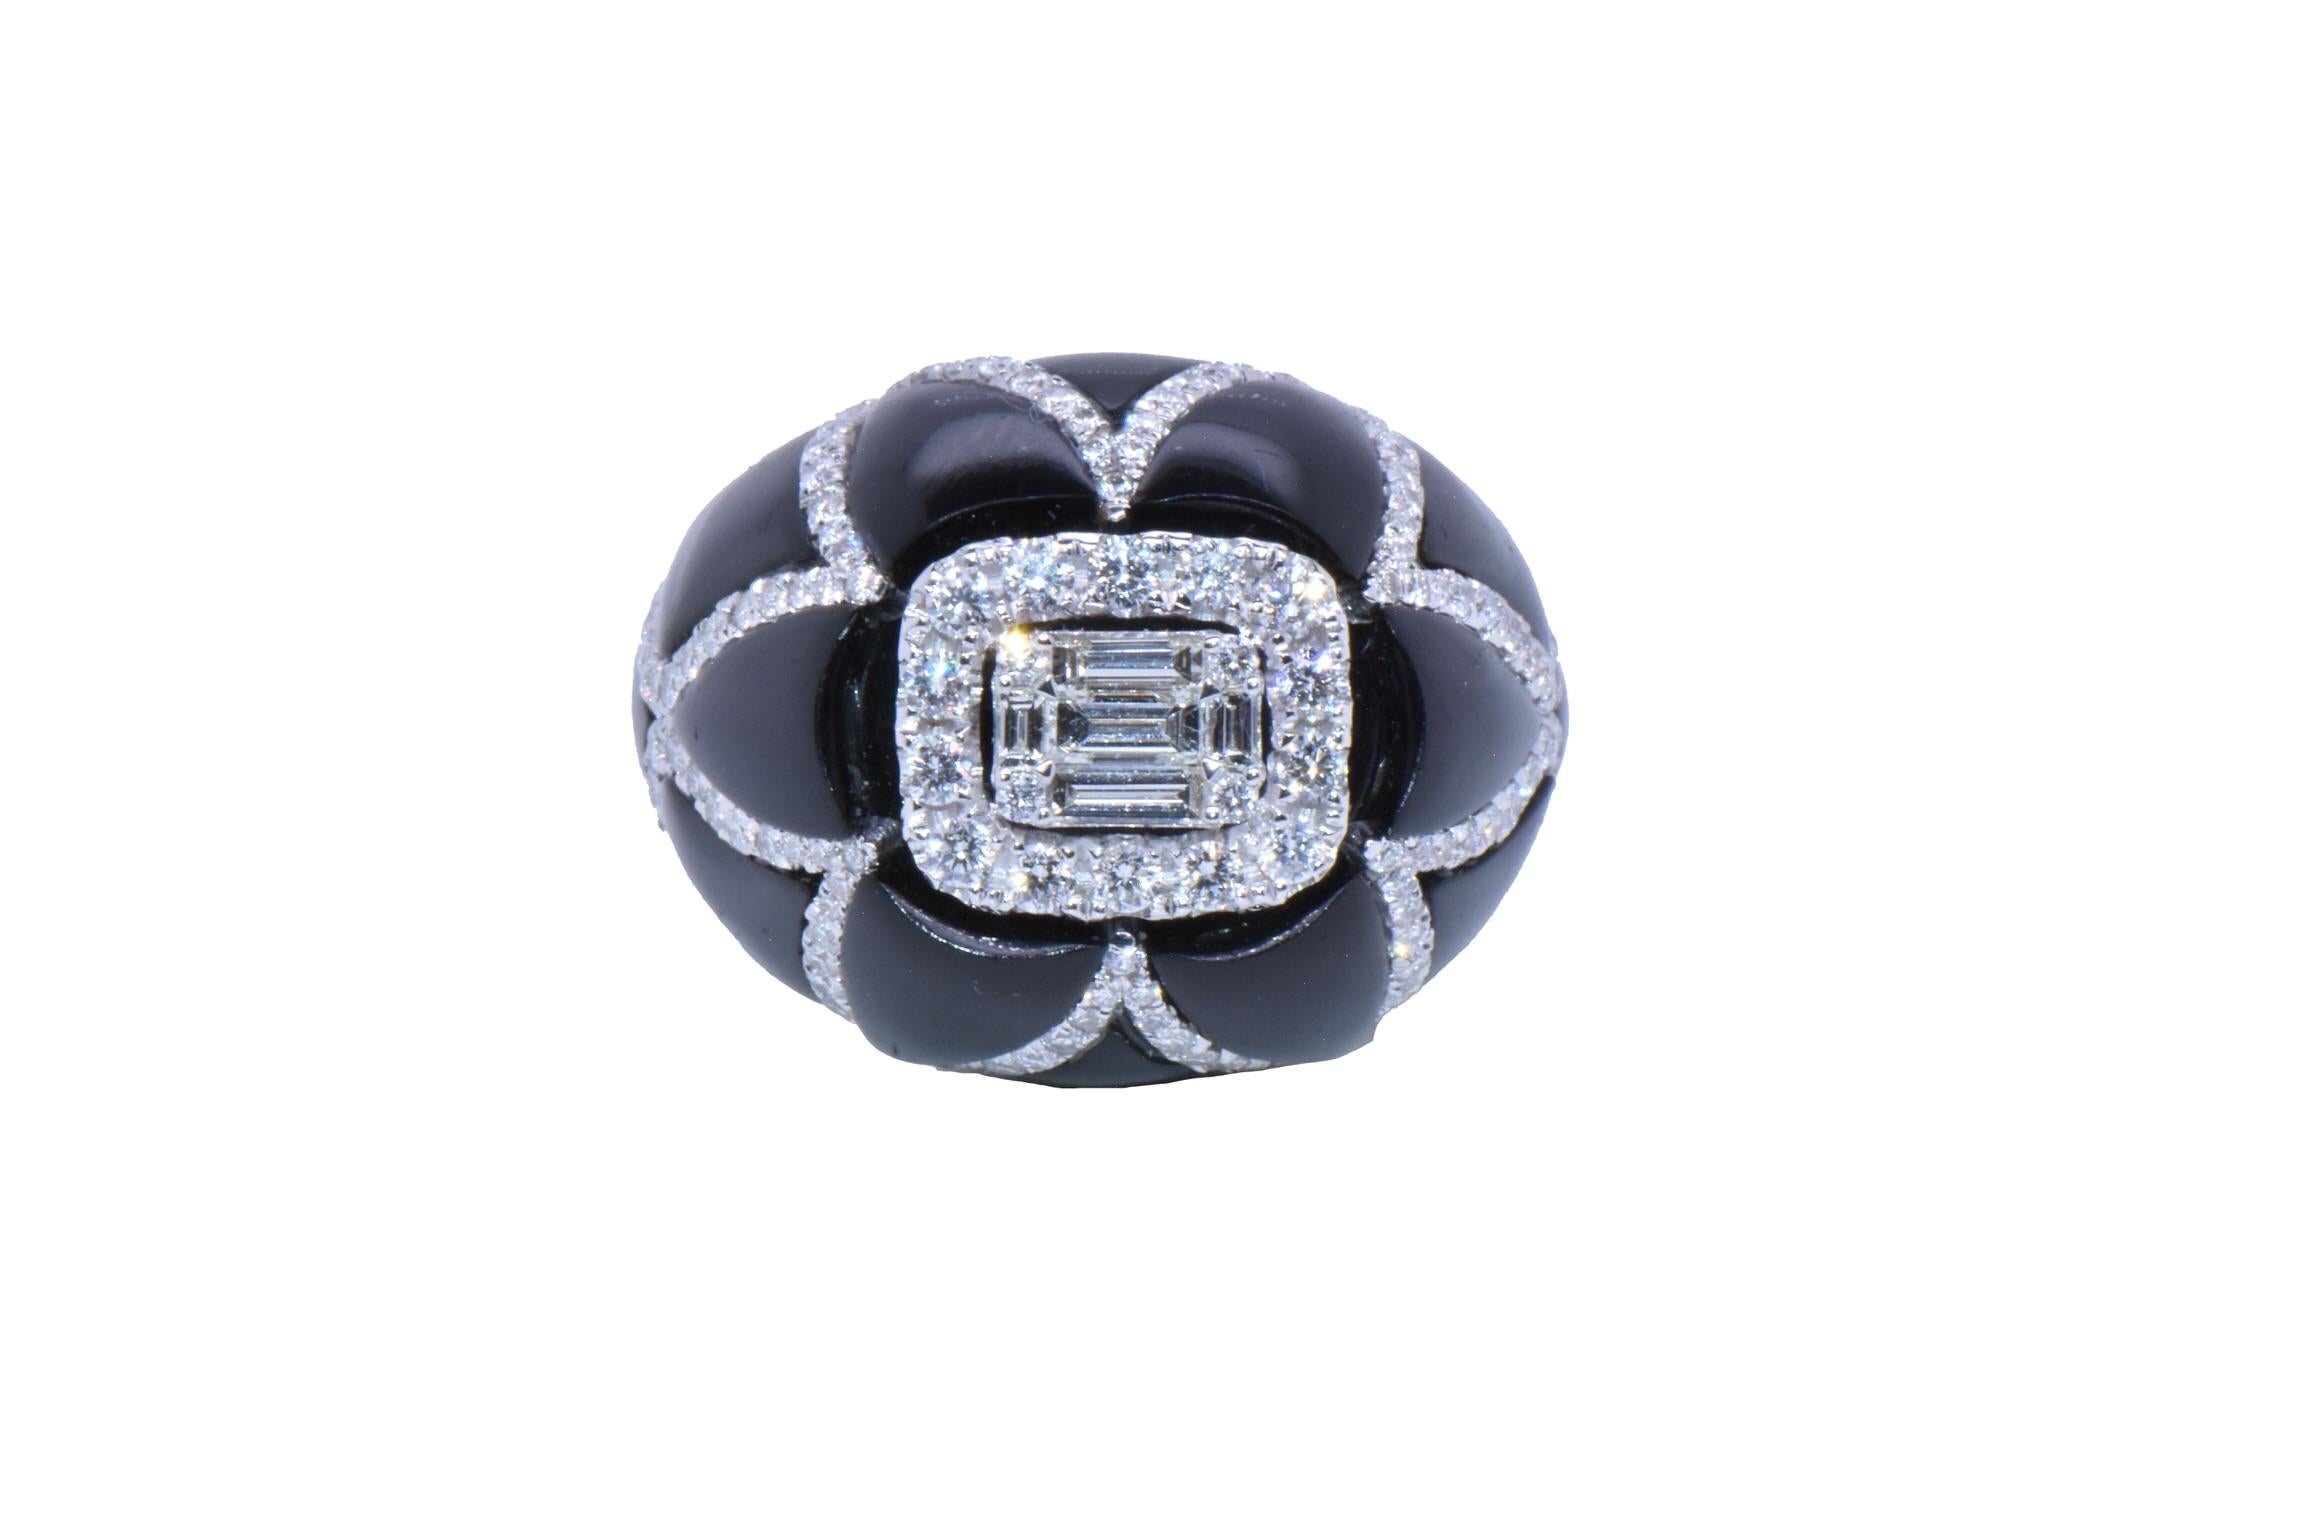 Aesthetic Movement 2.24 Carat Diamond & Onyx 3D Flower Ring with Baguette Center in 18k White Gold For Sale